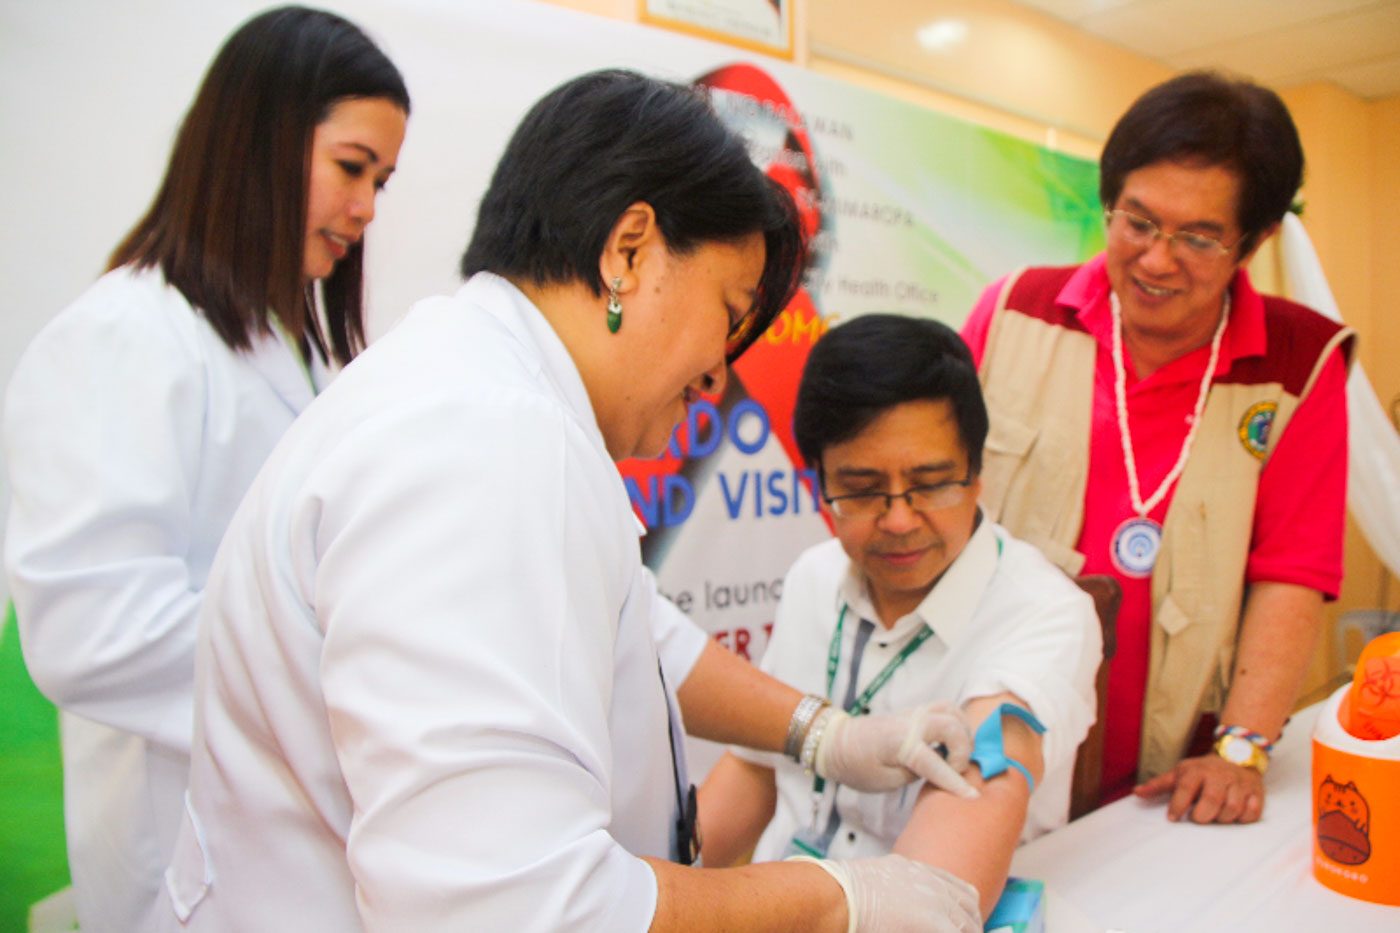 100 HIV-positive cases recorded in Palawan – DOH